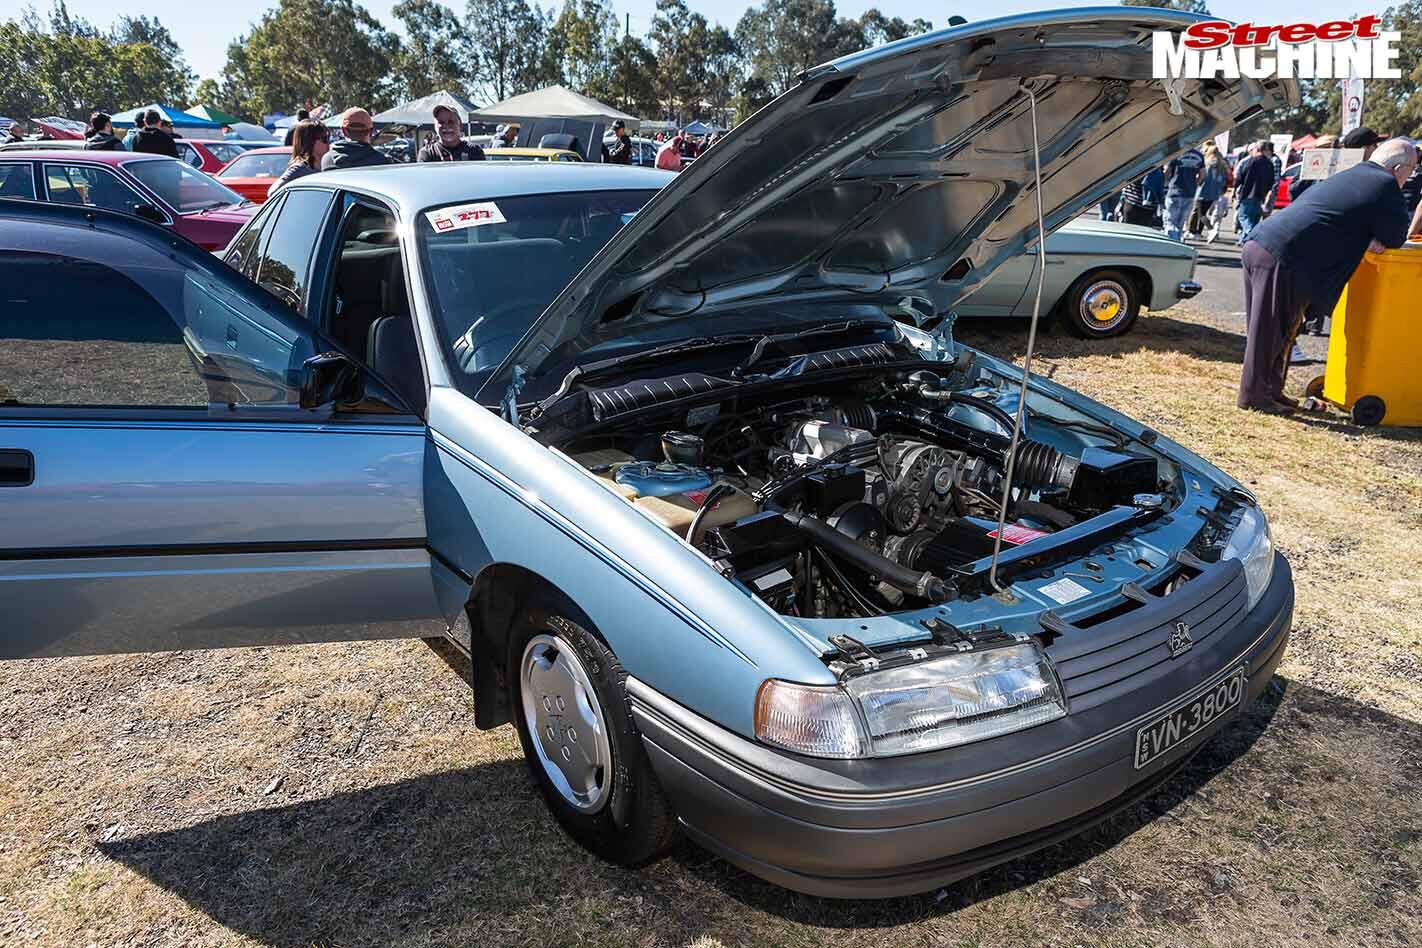 Holden VN Commodore